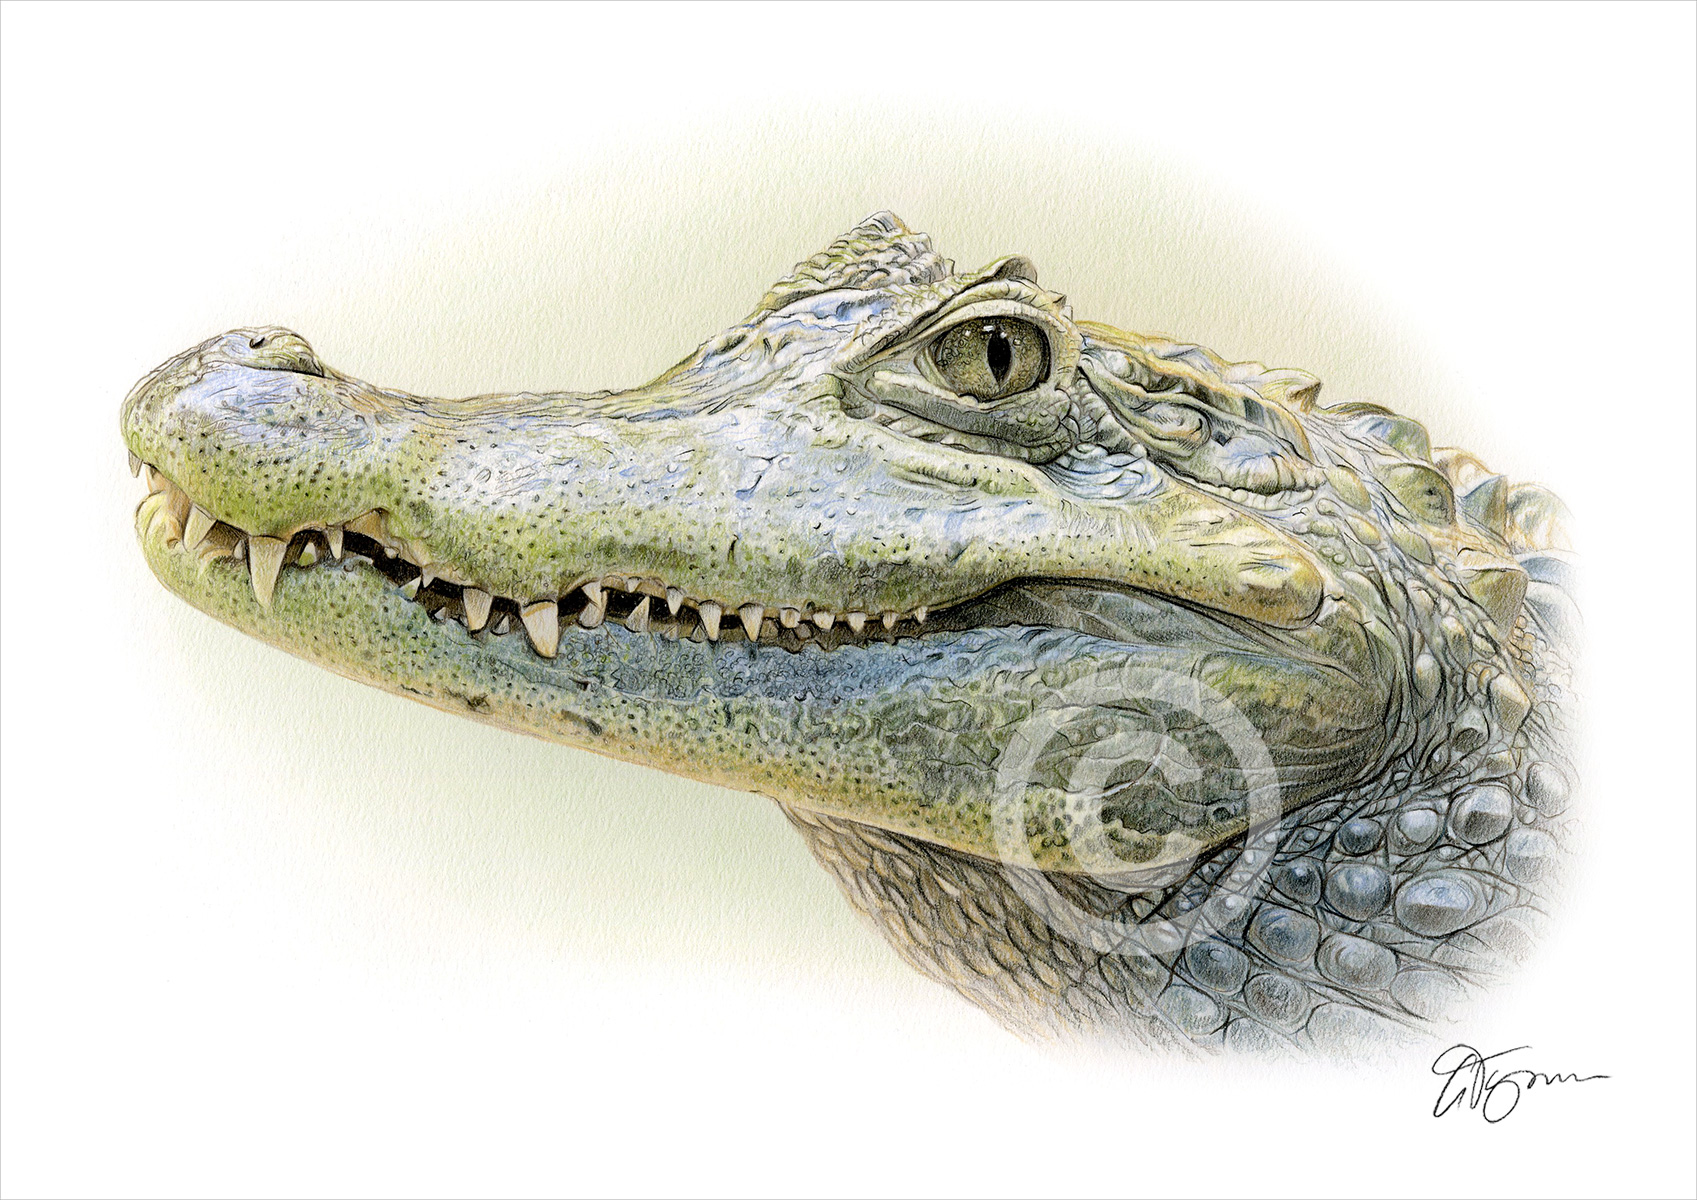 Colour pencil drawing of an alligator by artist Gary Tymon